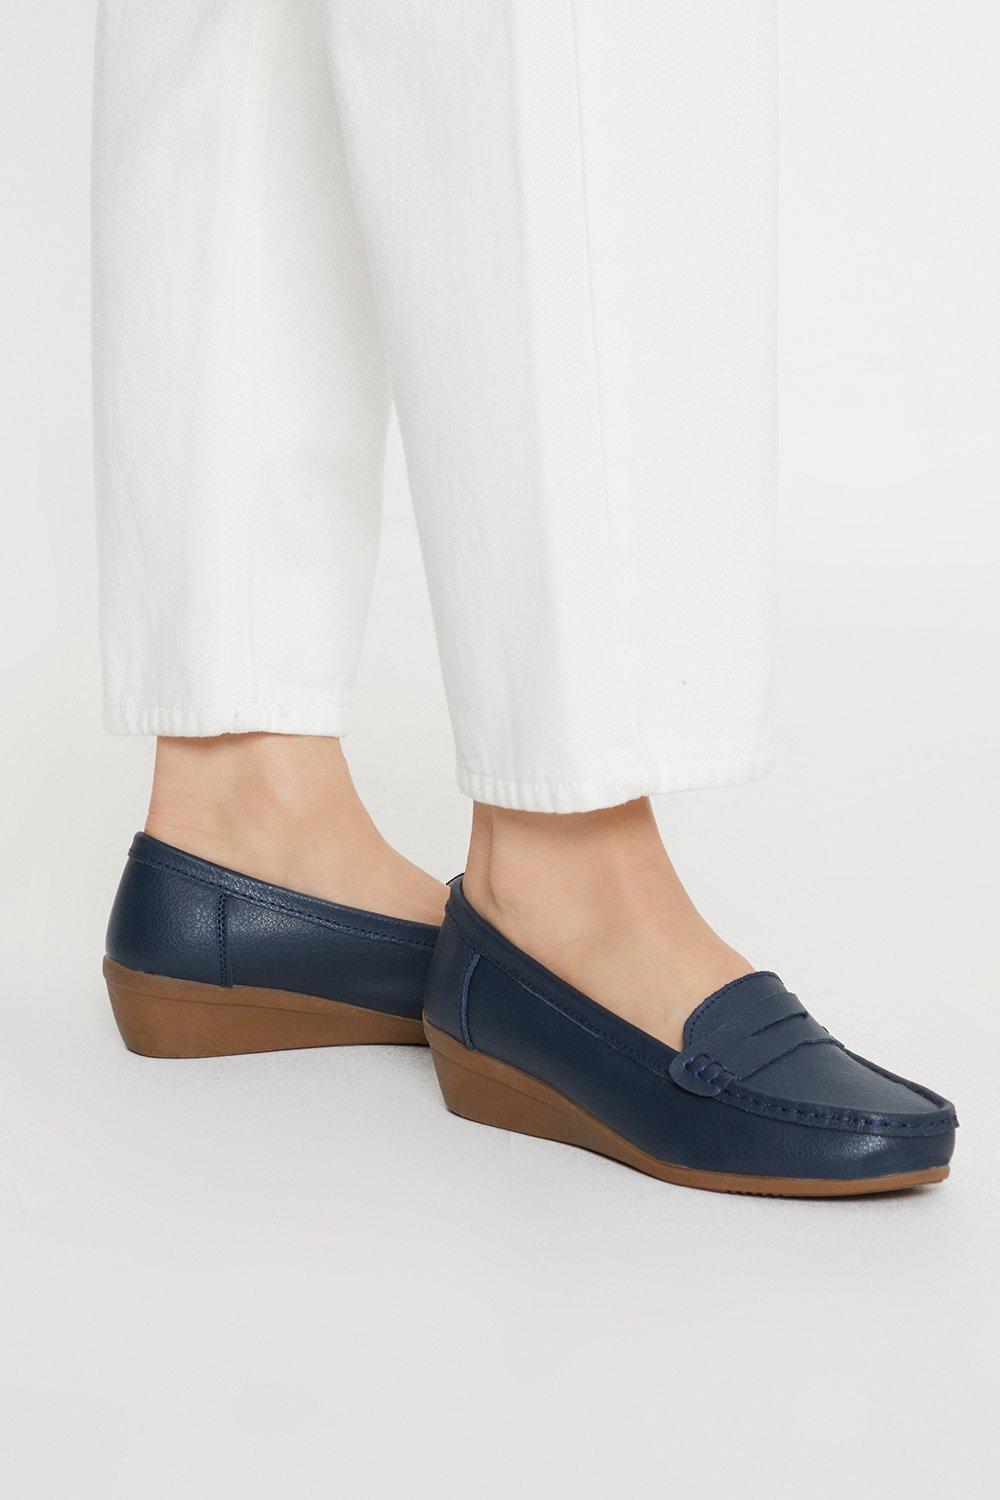 Women’s Good For The Sole: Niamh Wide Fit Leather Comfort Loafers - navy - 6